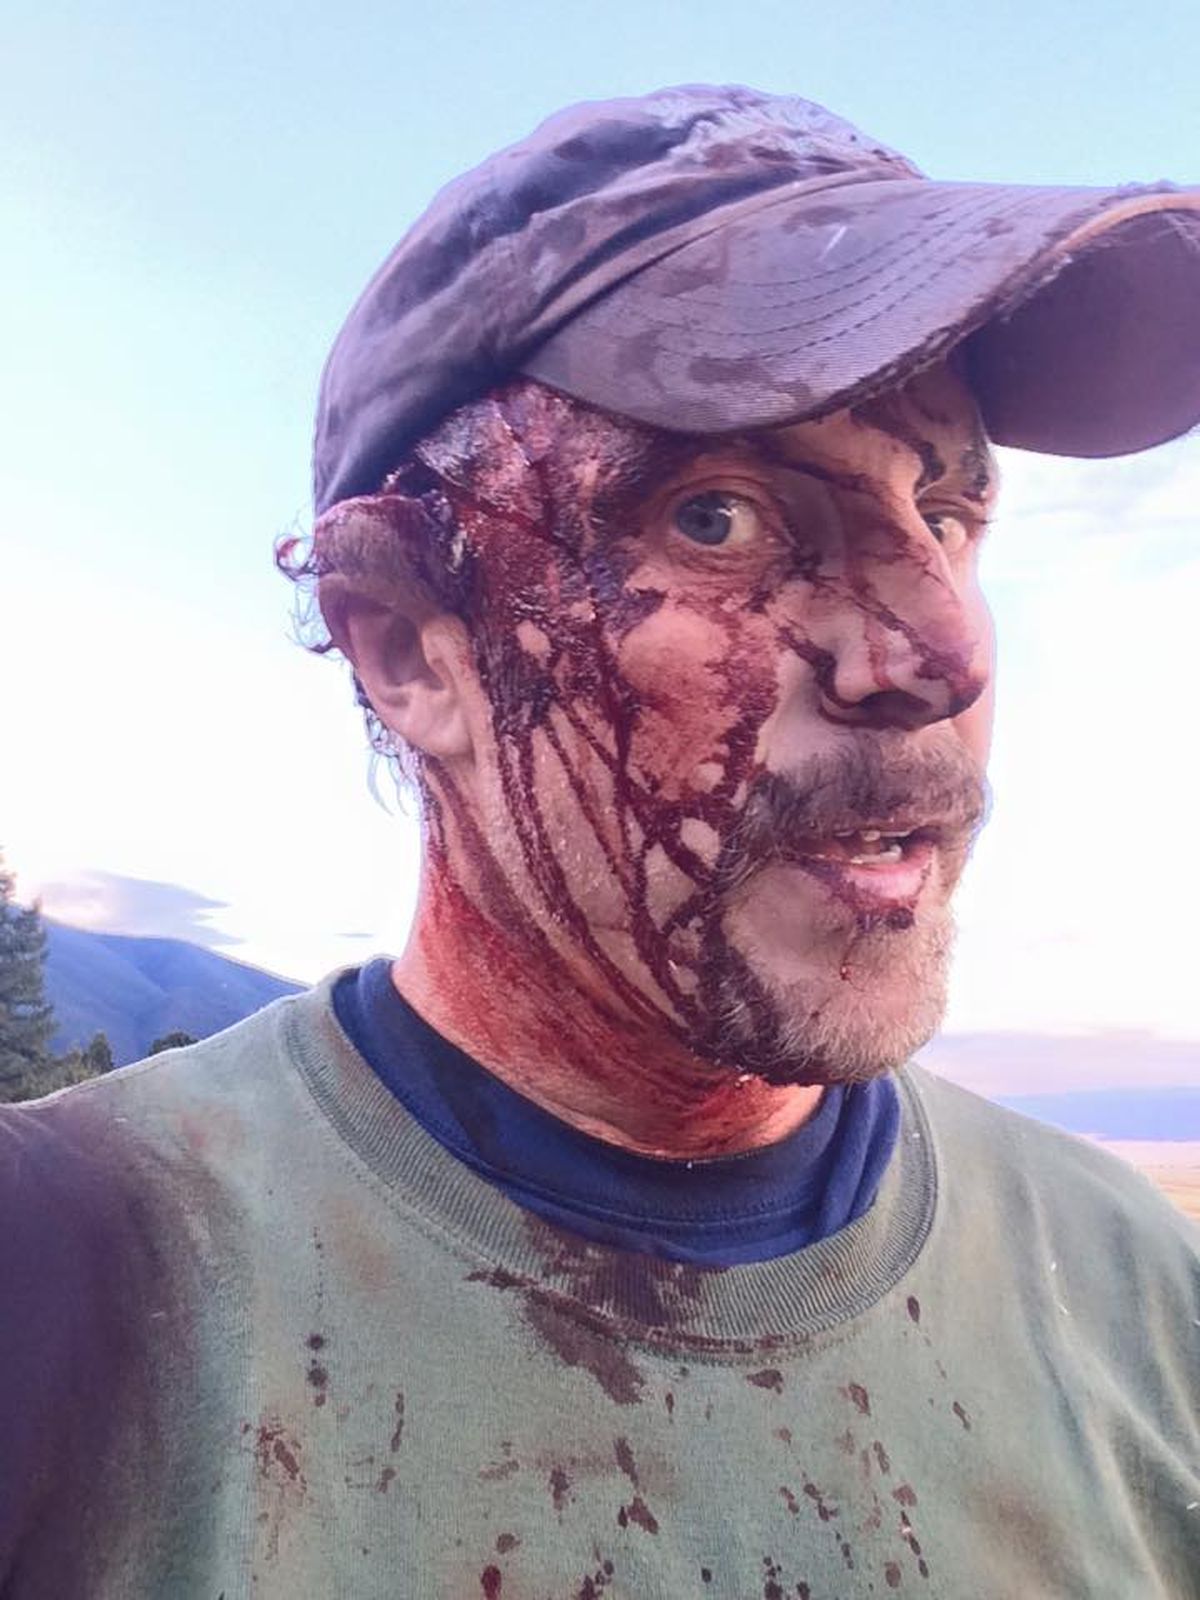 Todd Orr of Bozeman Montana, makes a short video after being mauled by a sow grizzly bear that had two cubs. (Todd Orr)